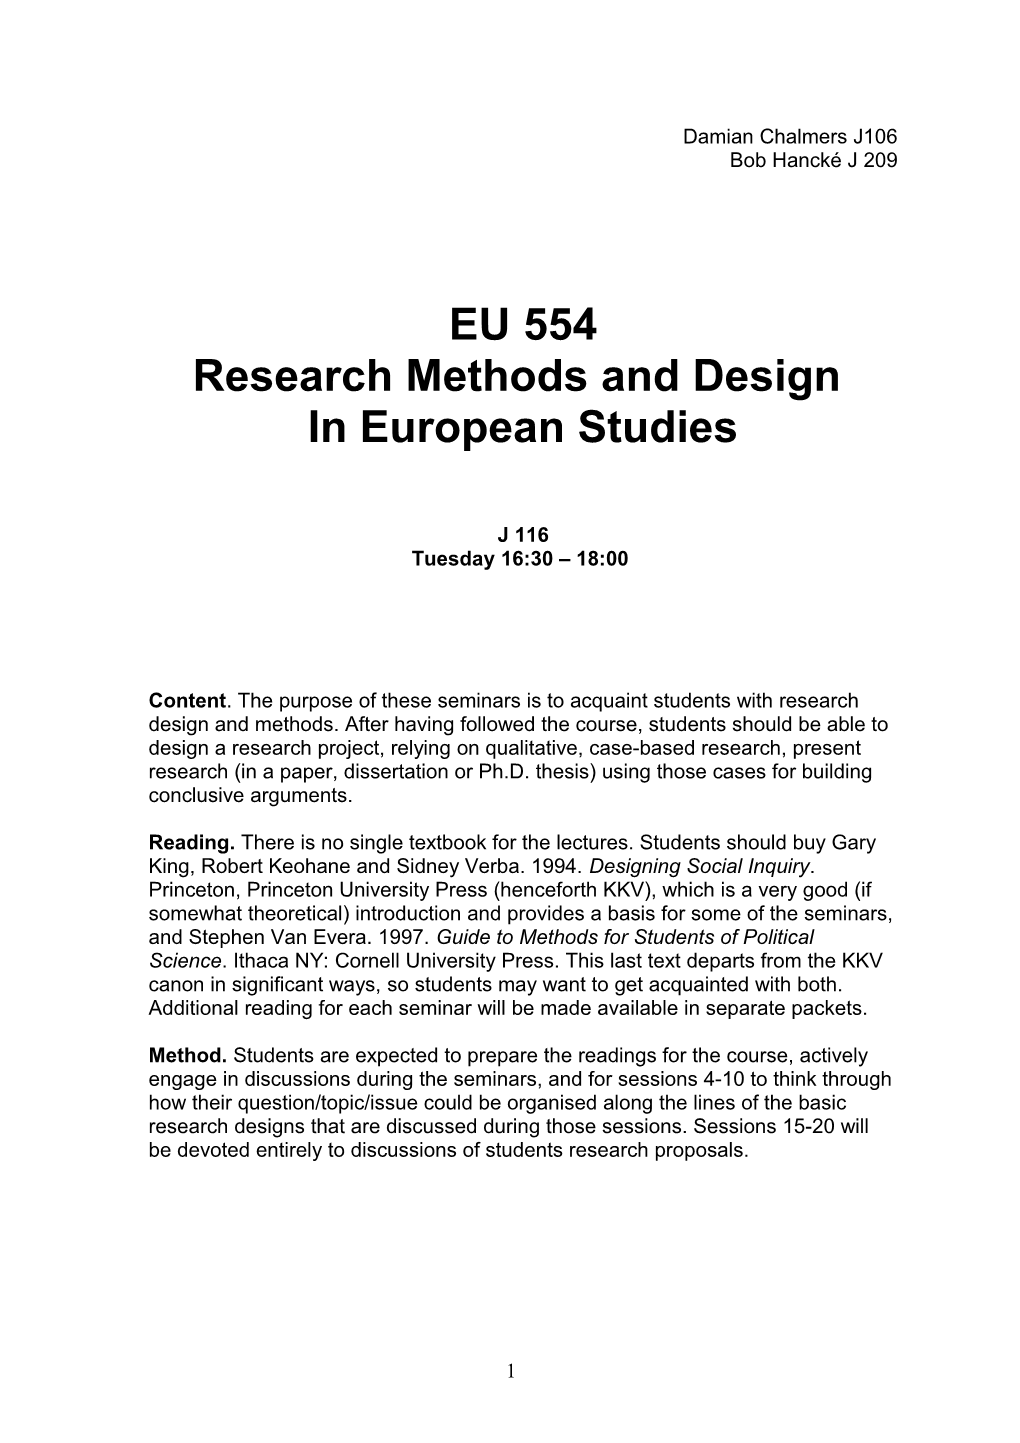 EU 550 - Introduction to Research Methods and Design